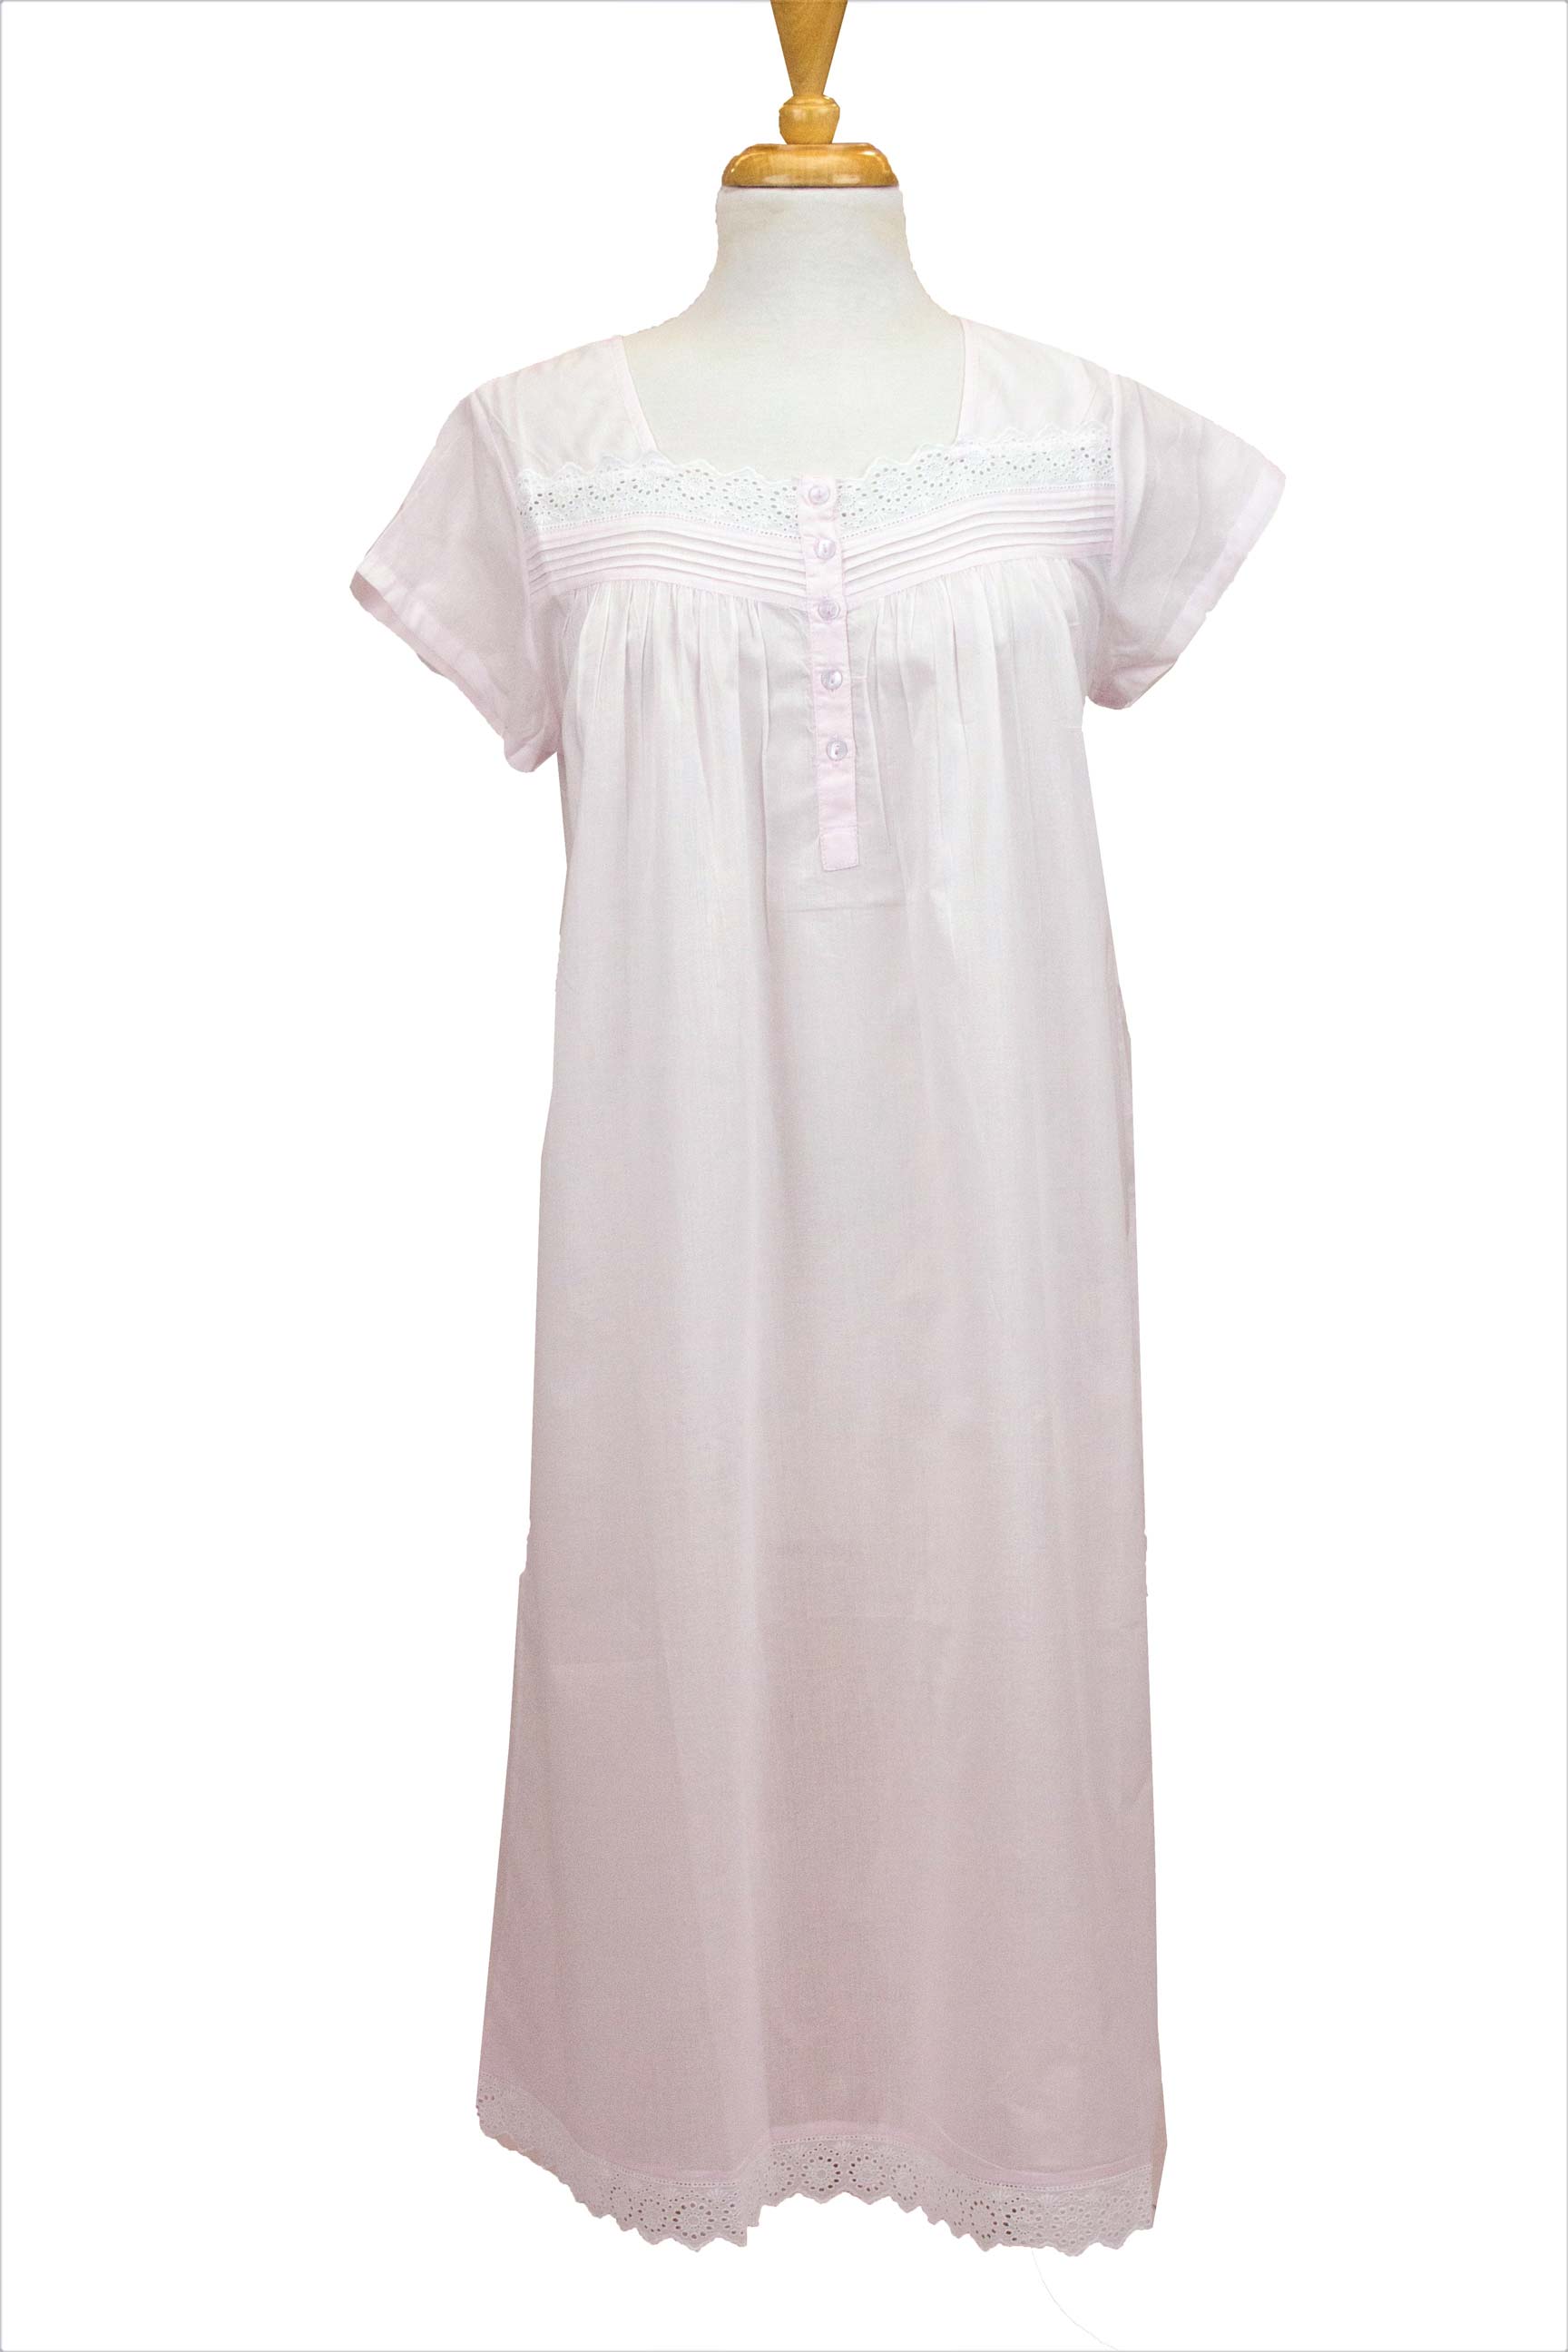 10 Latest Designs of Women's Cotton Nighties for Comfortable Feel